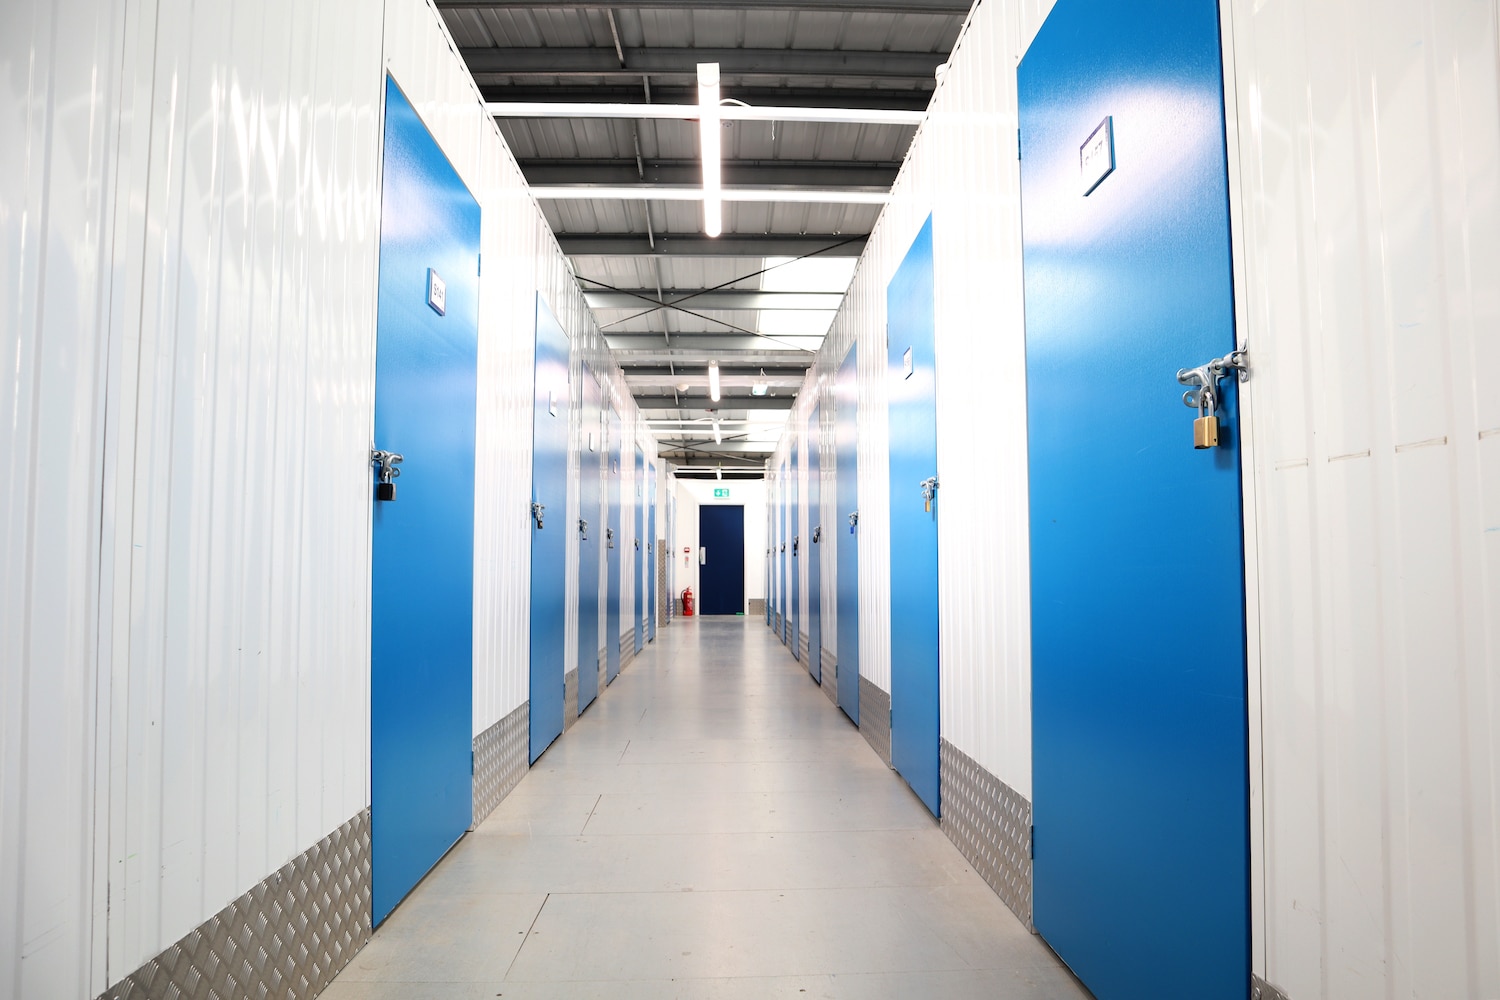 Storage unit in Enfield. Image shows the corridor of a storage unit facility with blue doors on either side.